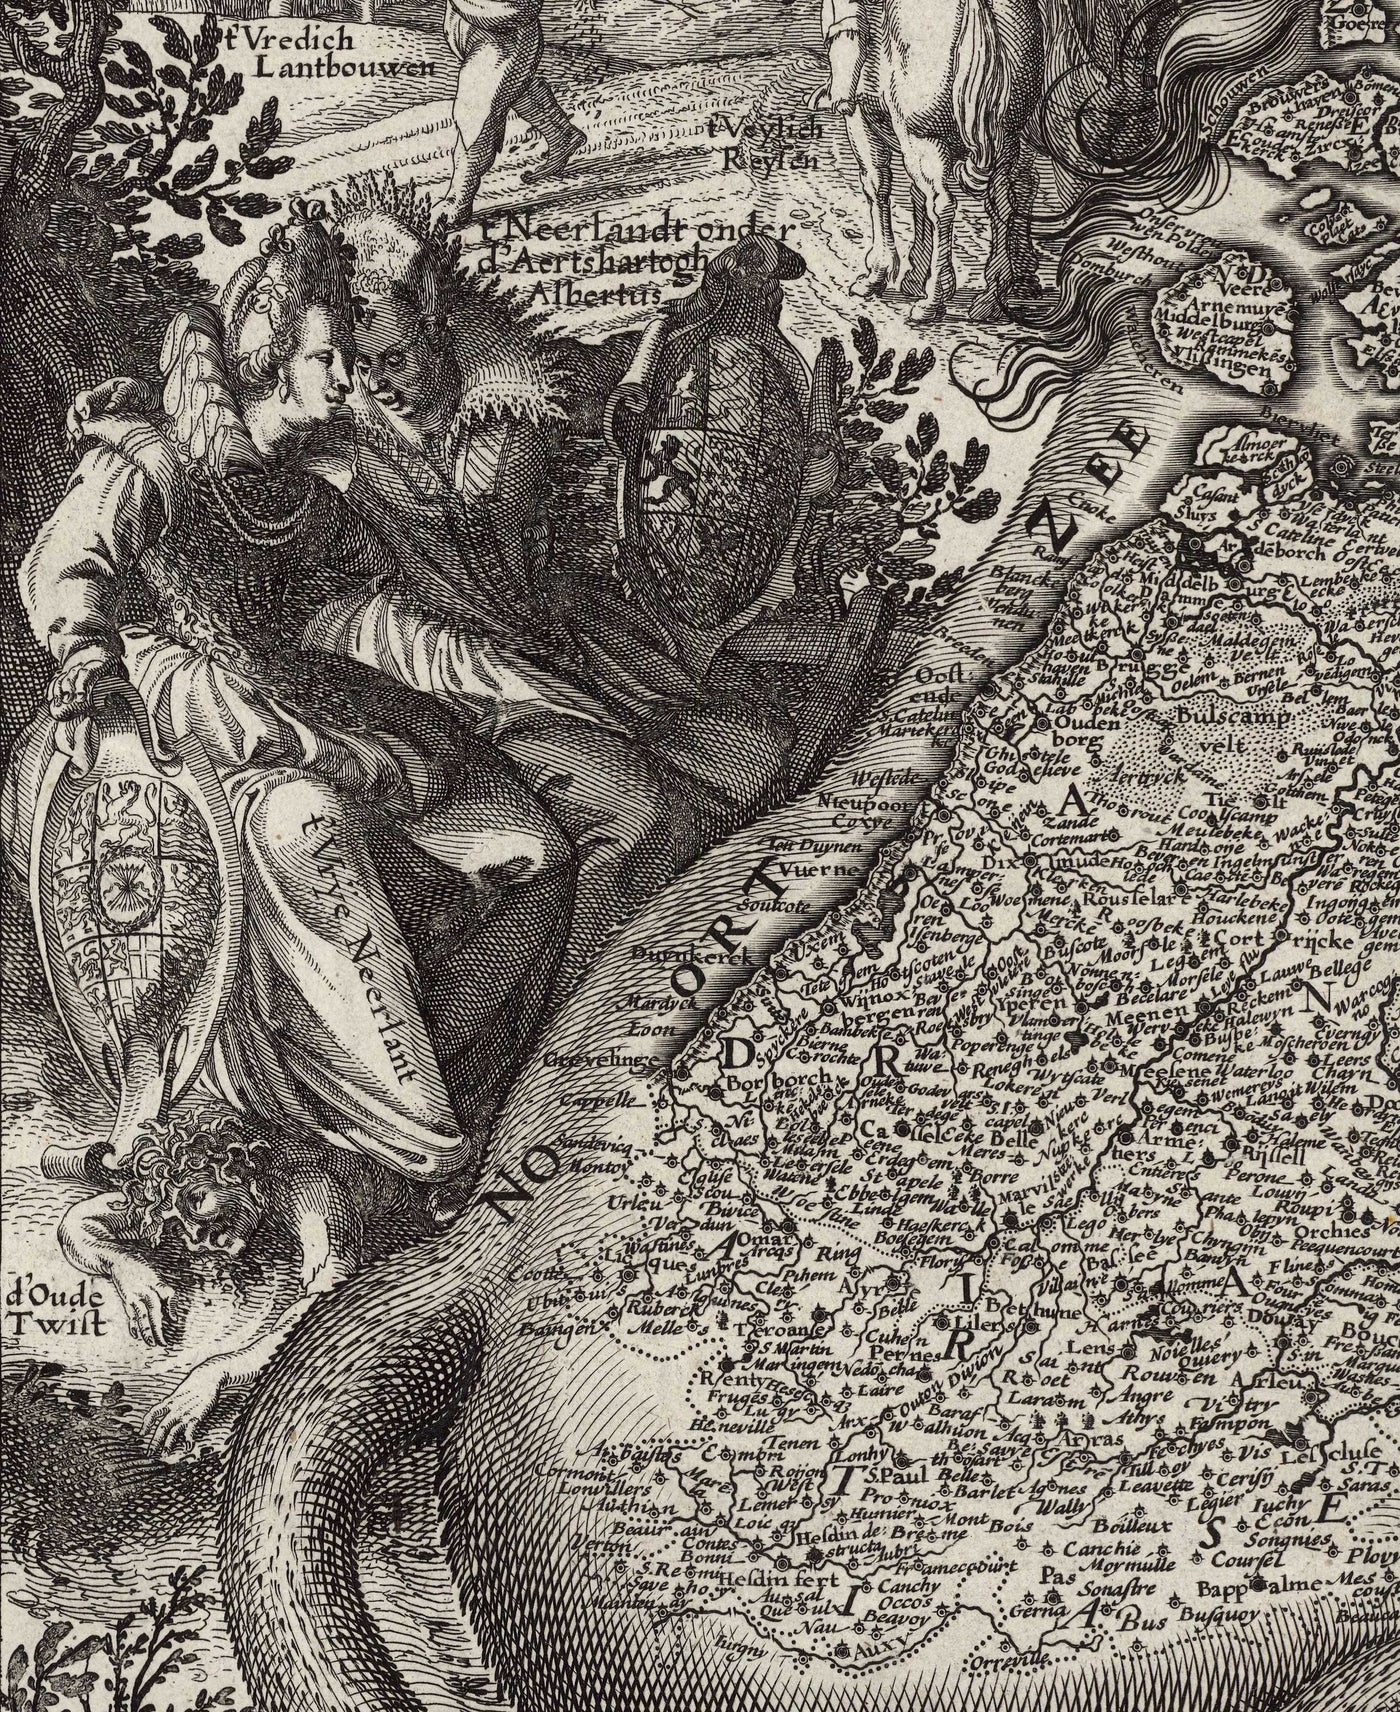 Old Leo Belgicus Map of the Low Countires in 1611 by C. Janszoon Visscher - Netherlands, Belgium, Brussels, Amsterdam, Genk